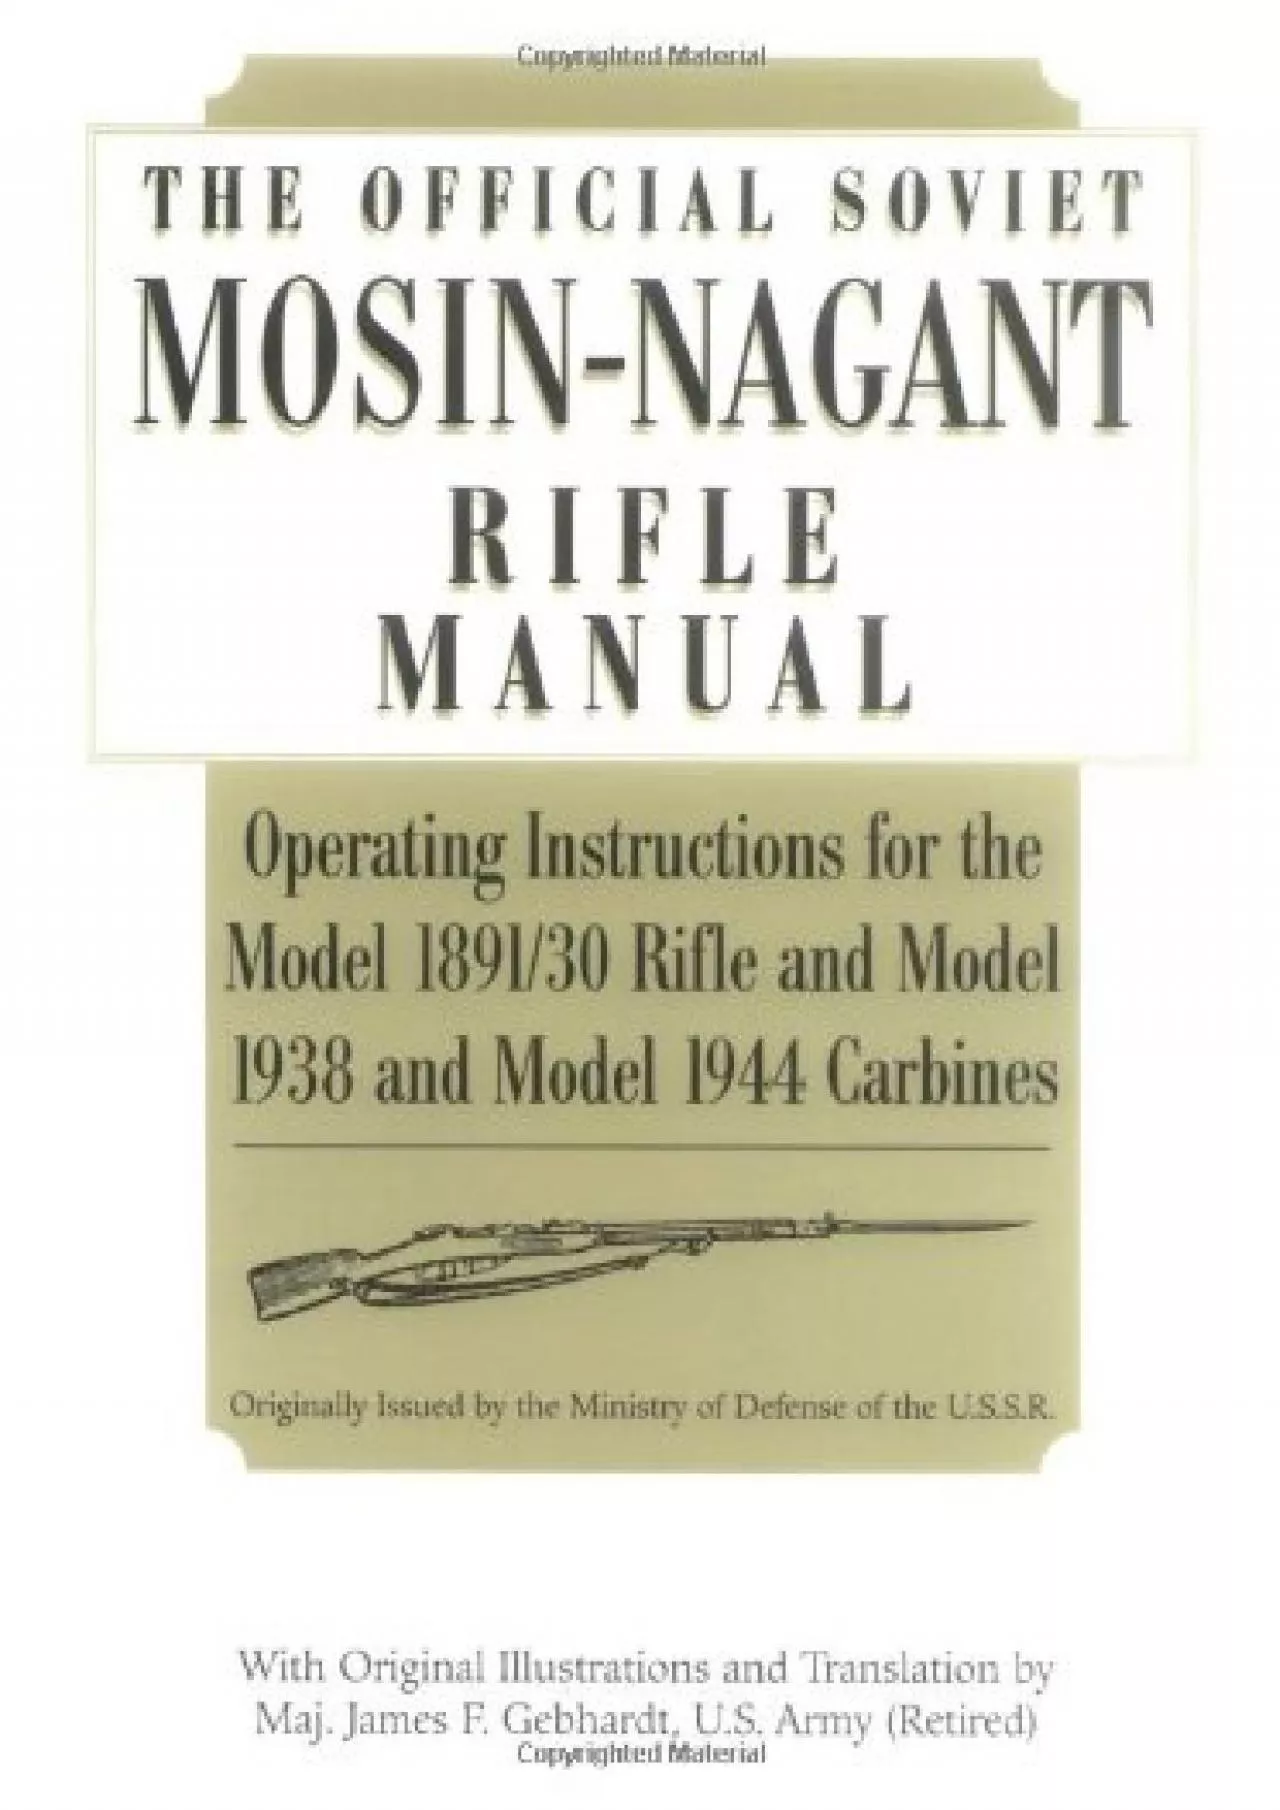 [BOOK]-Official Soviet Mosin-Nagant Rifle Manual: Operating Instructions for the Model